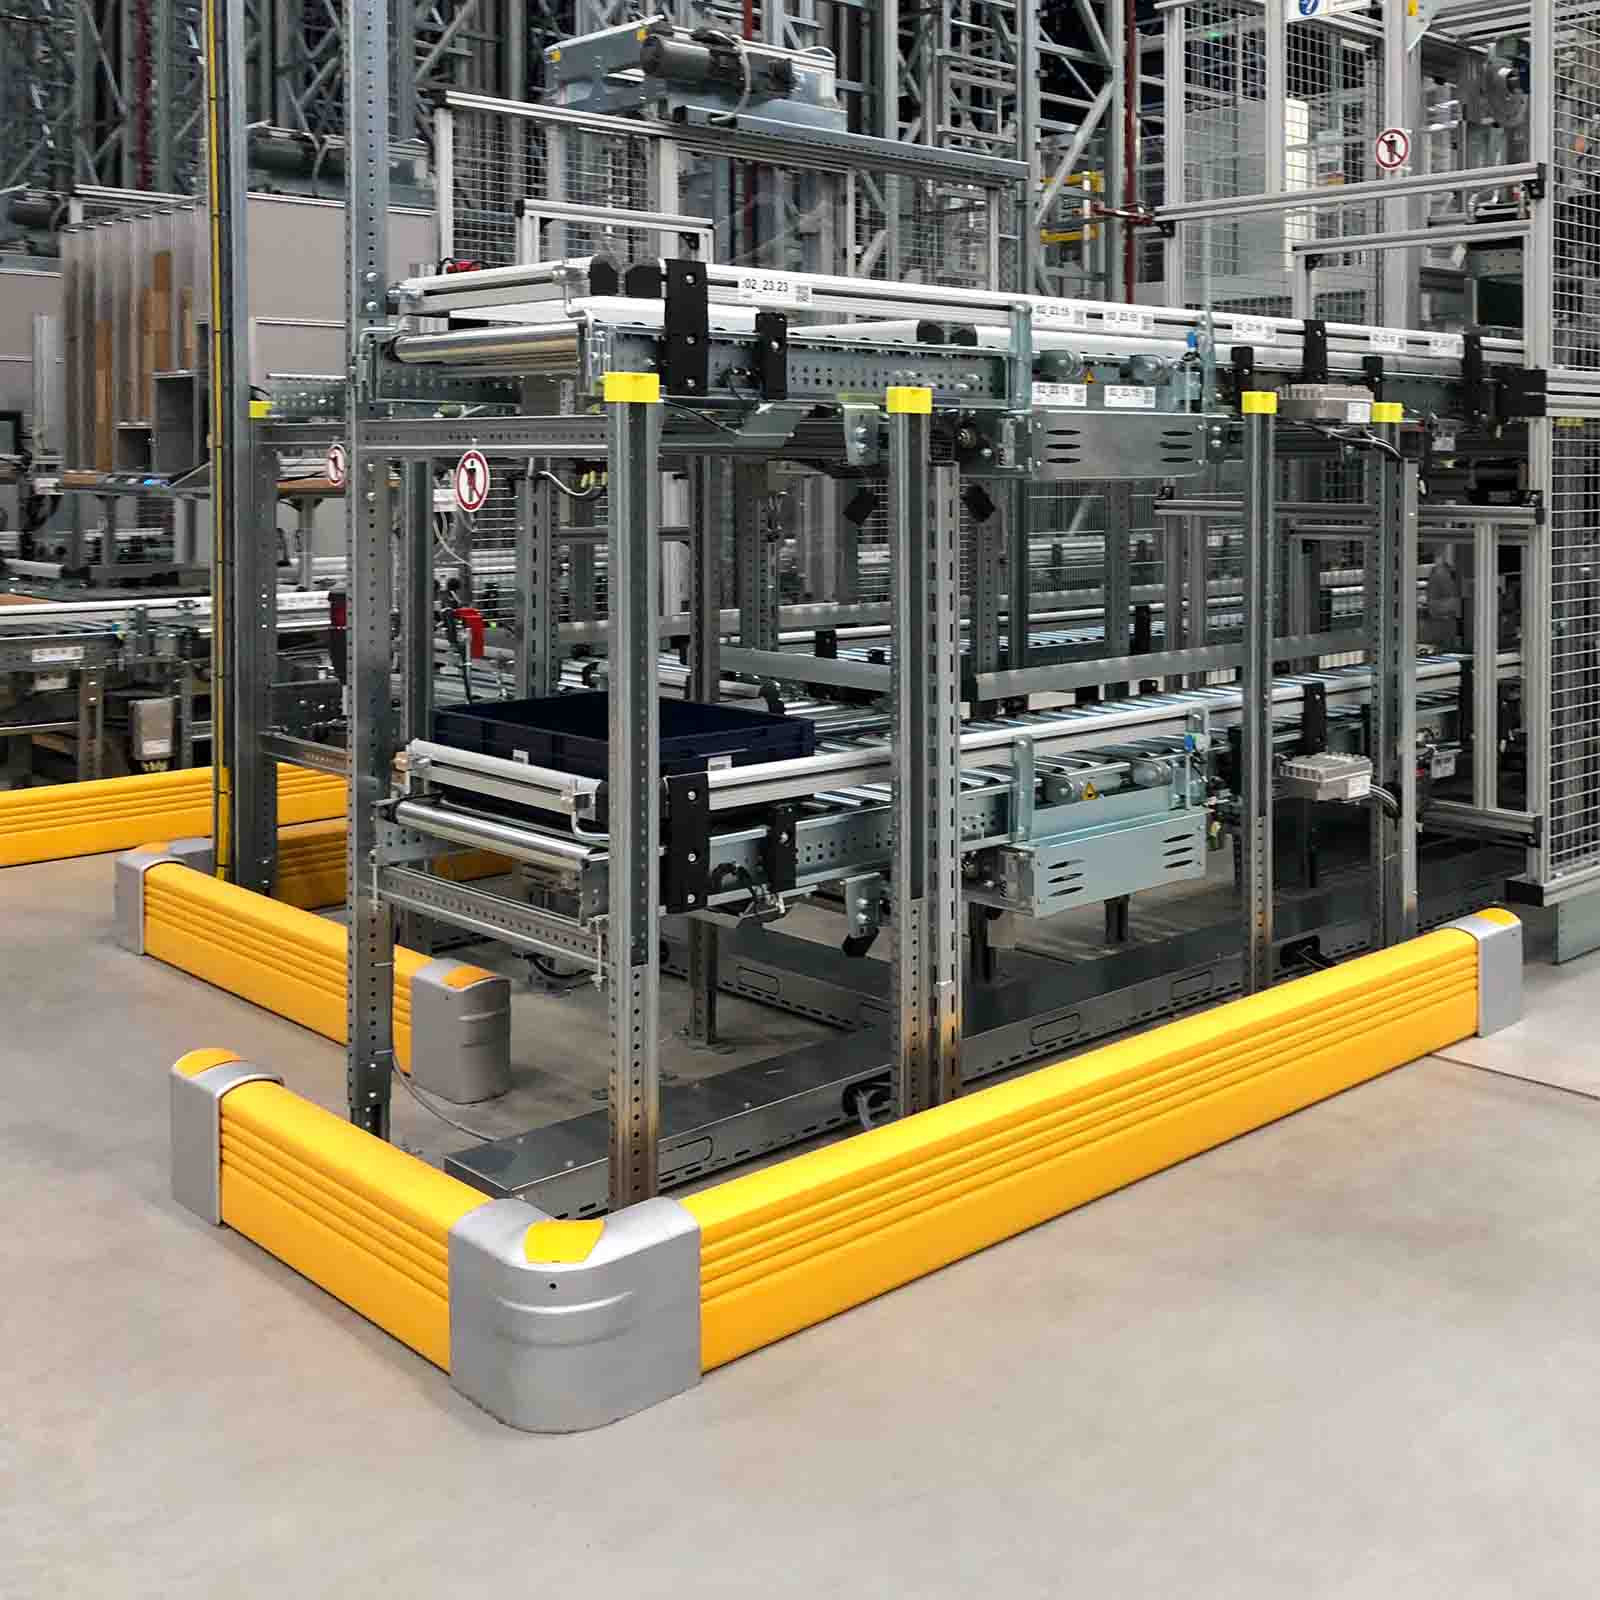 McCue Crash Barrier PLUS Safety Protection in warehouse